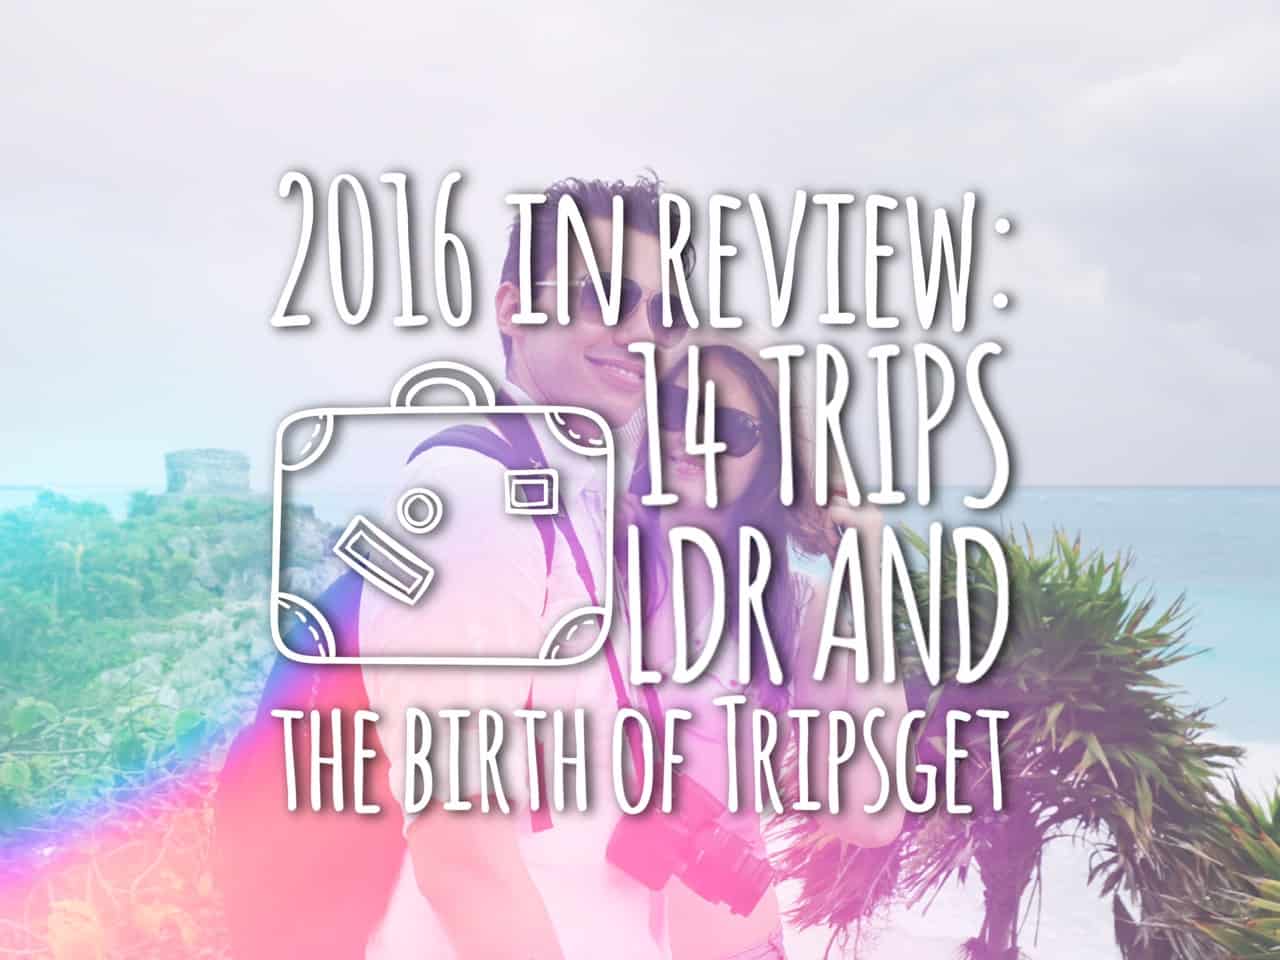 2016 travel year in review – 14 trips, LDR and the birth of Tripsget